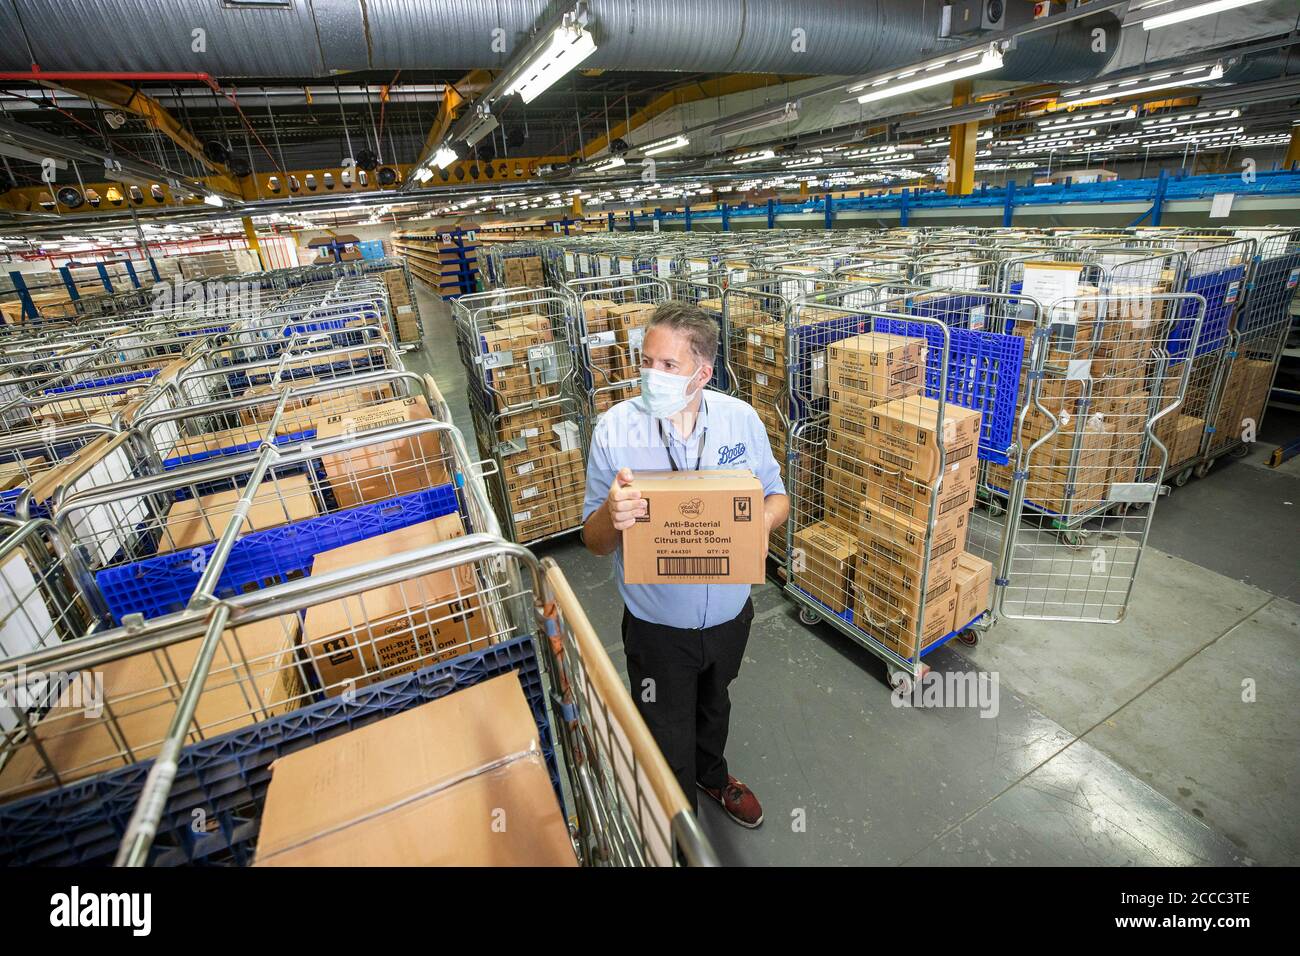 Boots Warehouse High Resolution Stock Photography and Images - Alamy